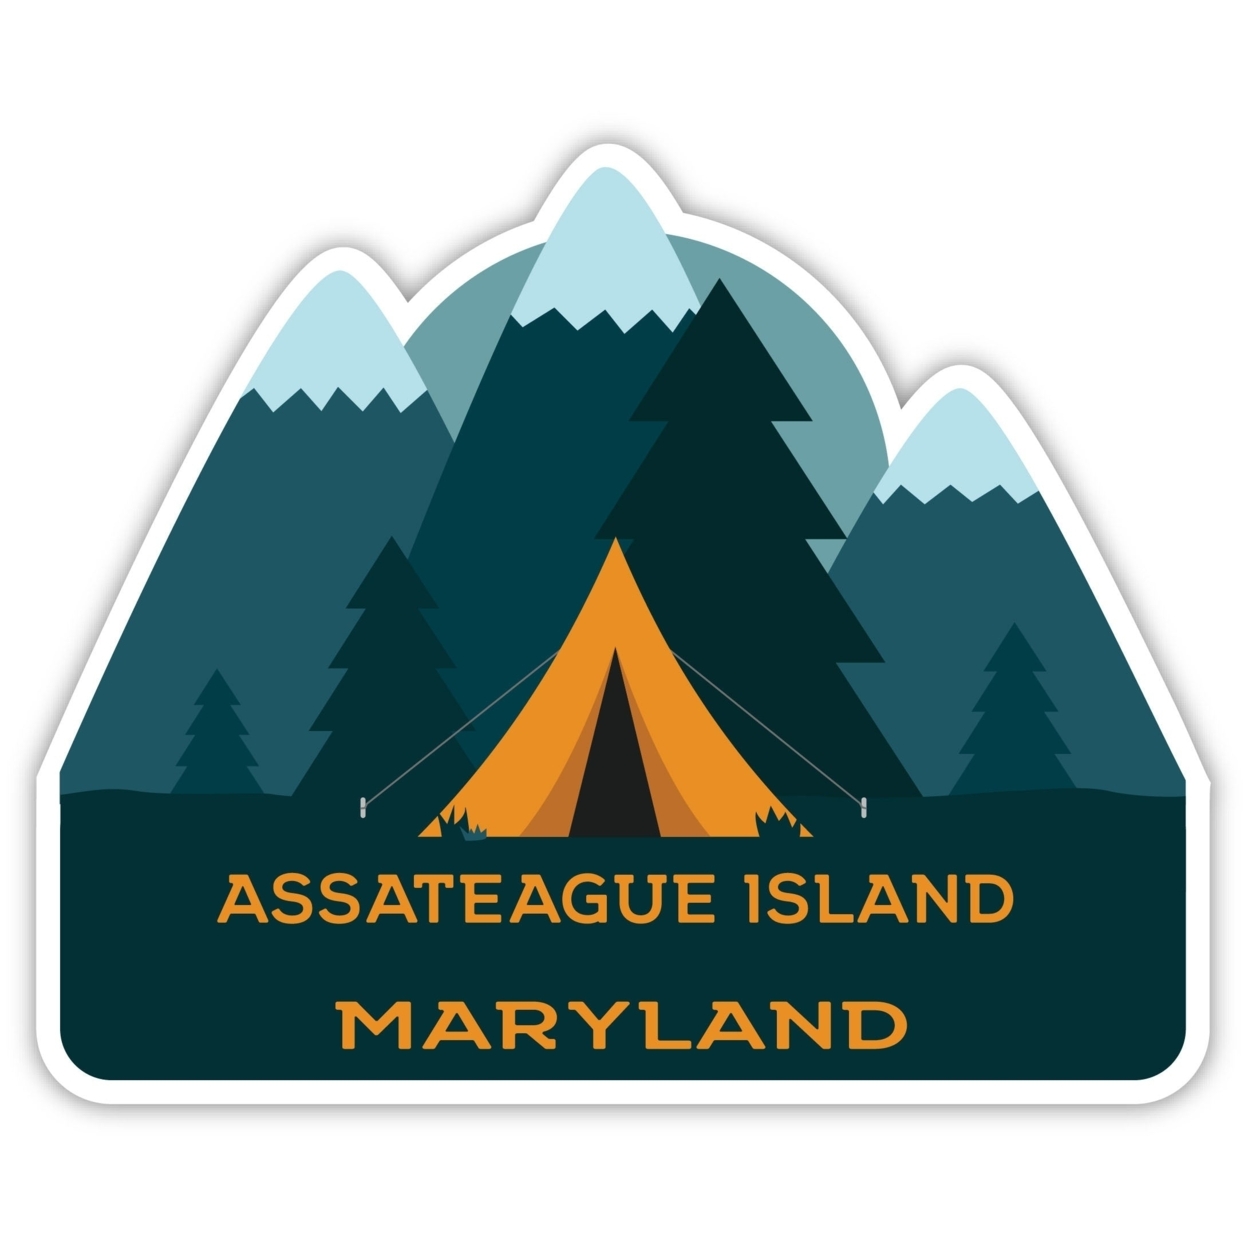 Assateague Island Maryland Souvenir Decorative Stickers (Choose Theme And Size) - 4-Pack, 2-Inch, Tent